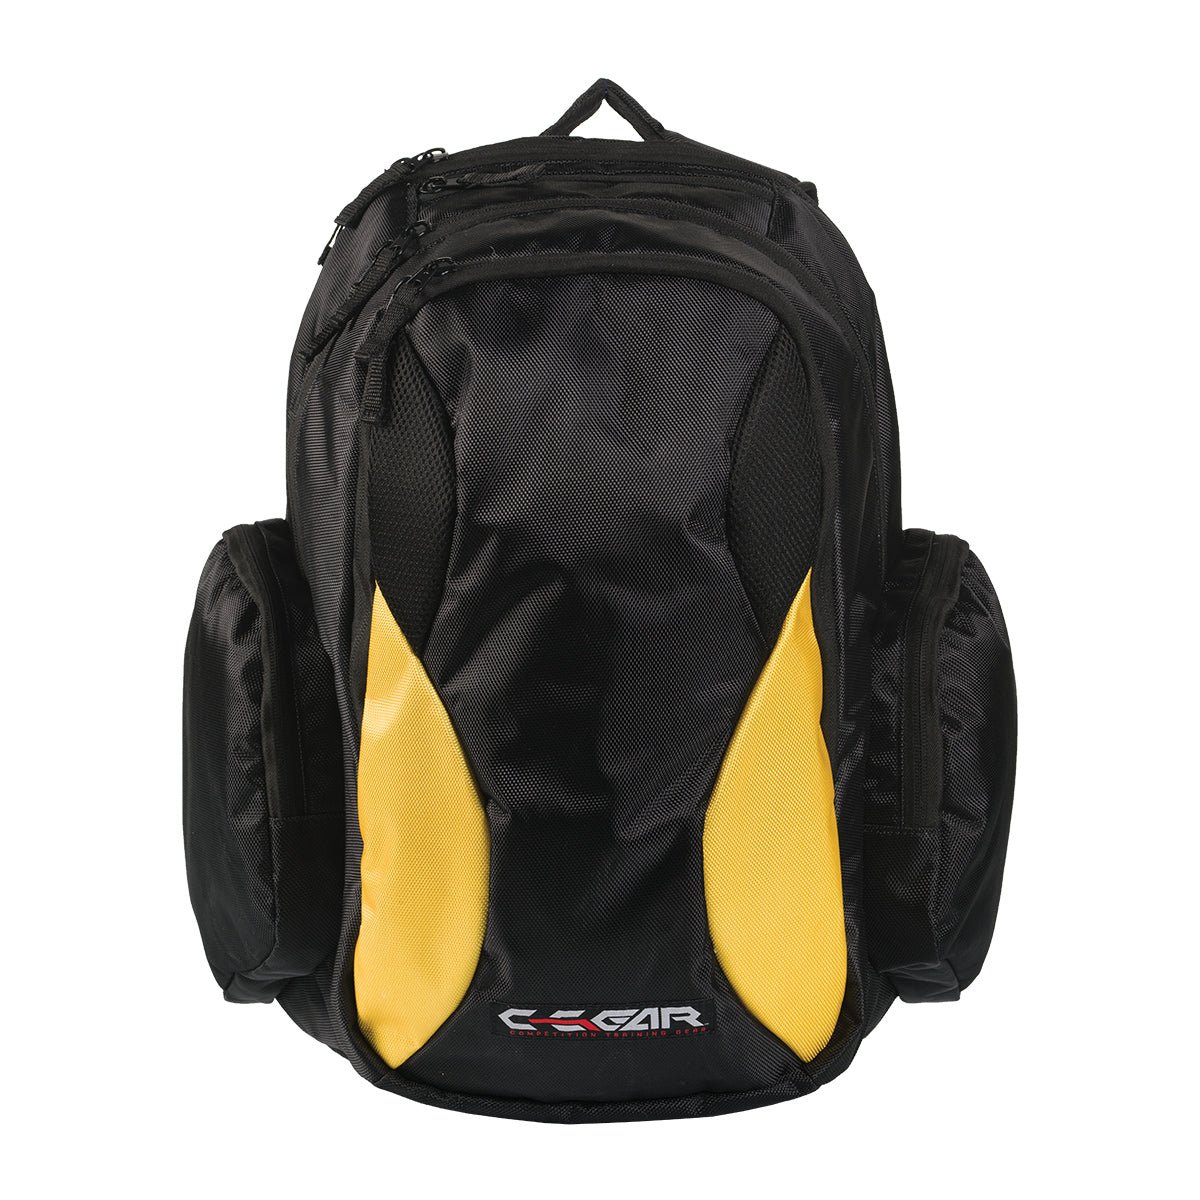 C-Gear Backpack Black Yellow